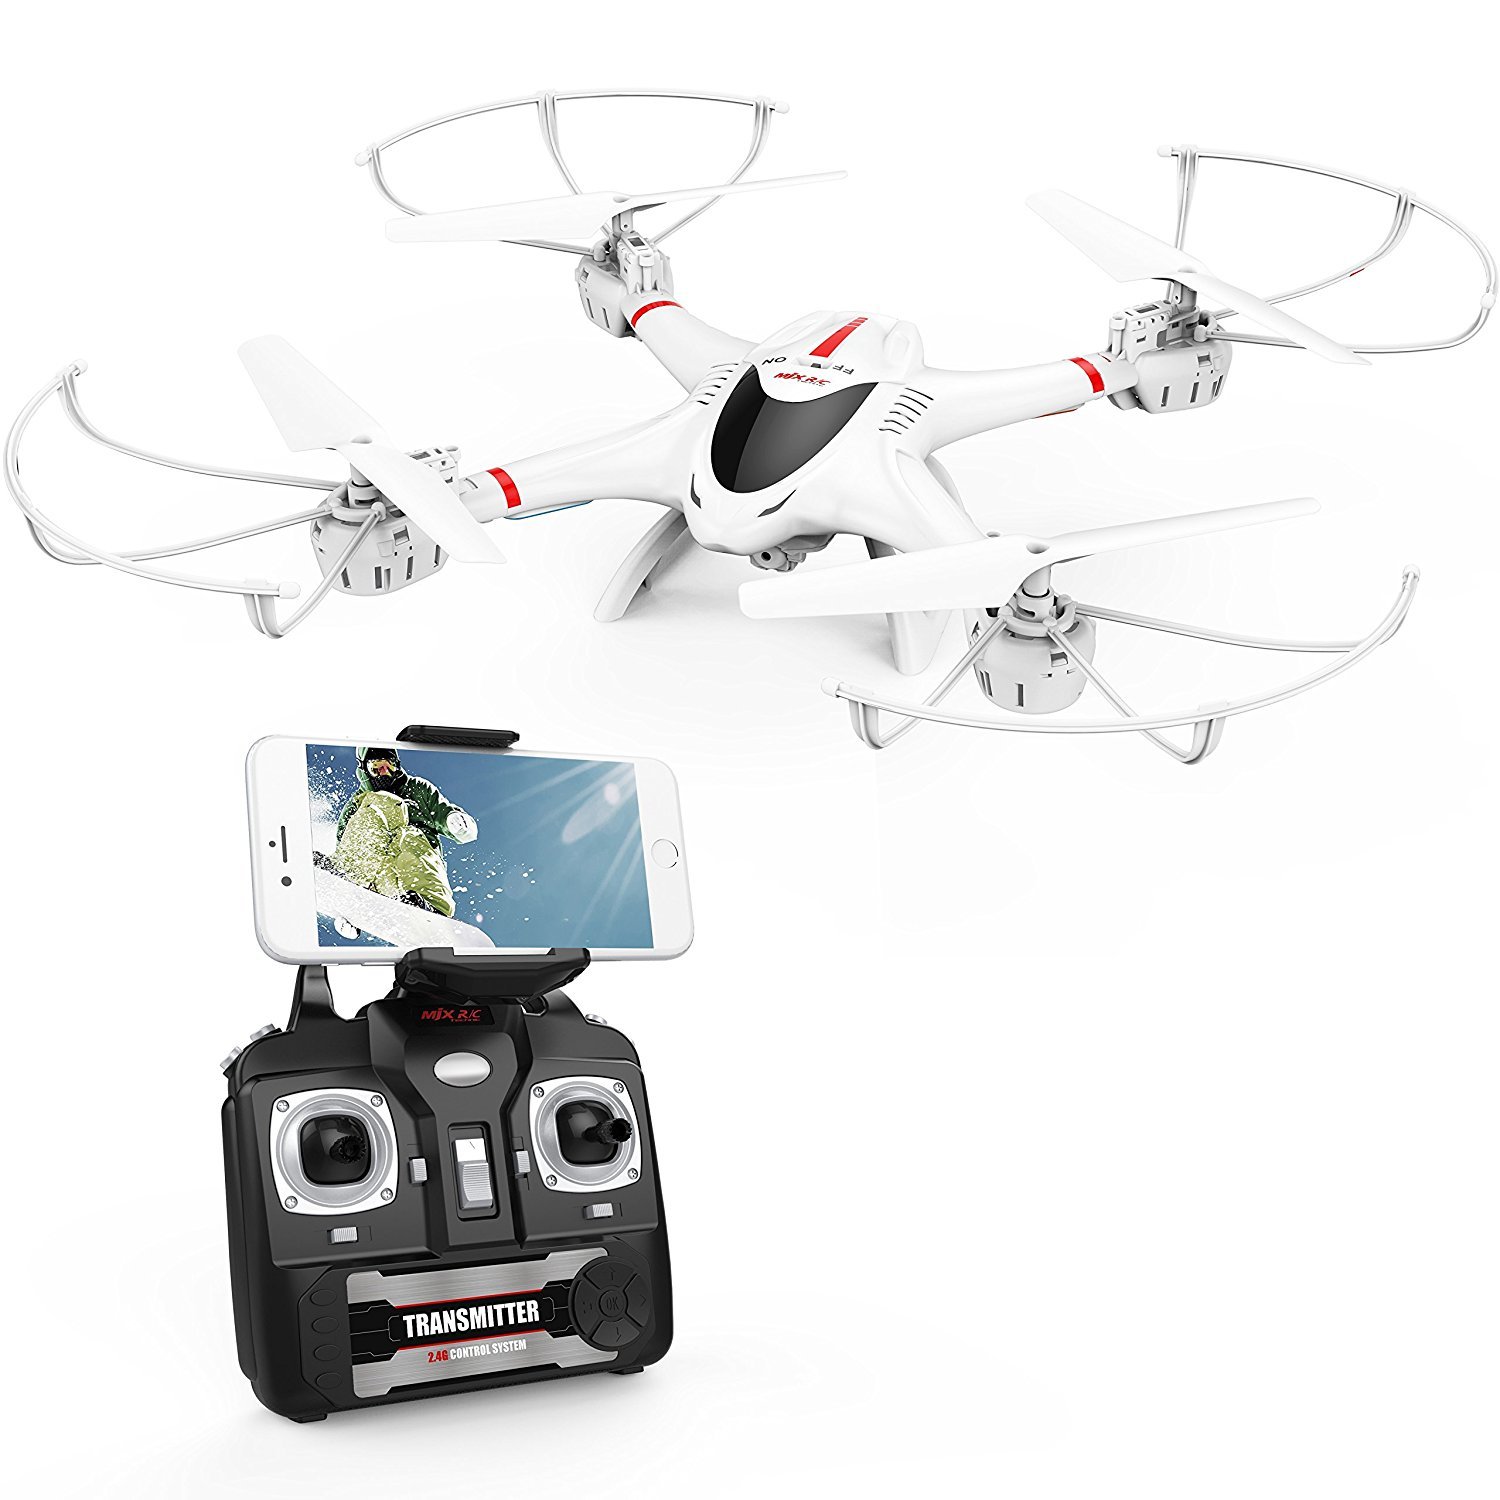 Reasons to choice RC Quadcopters rather than RC Helicopters as a gift